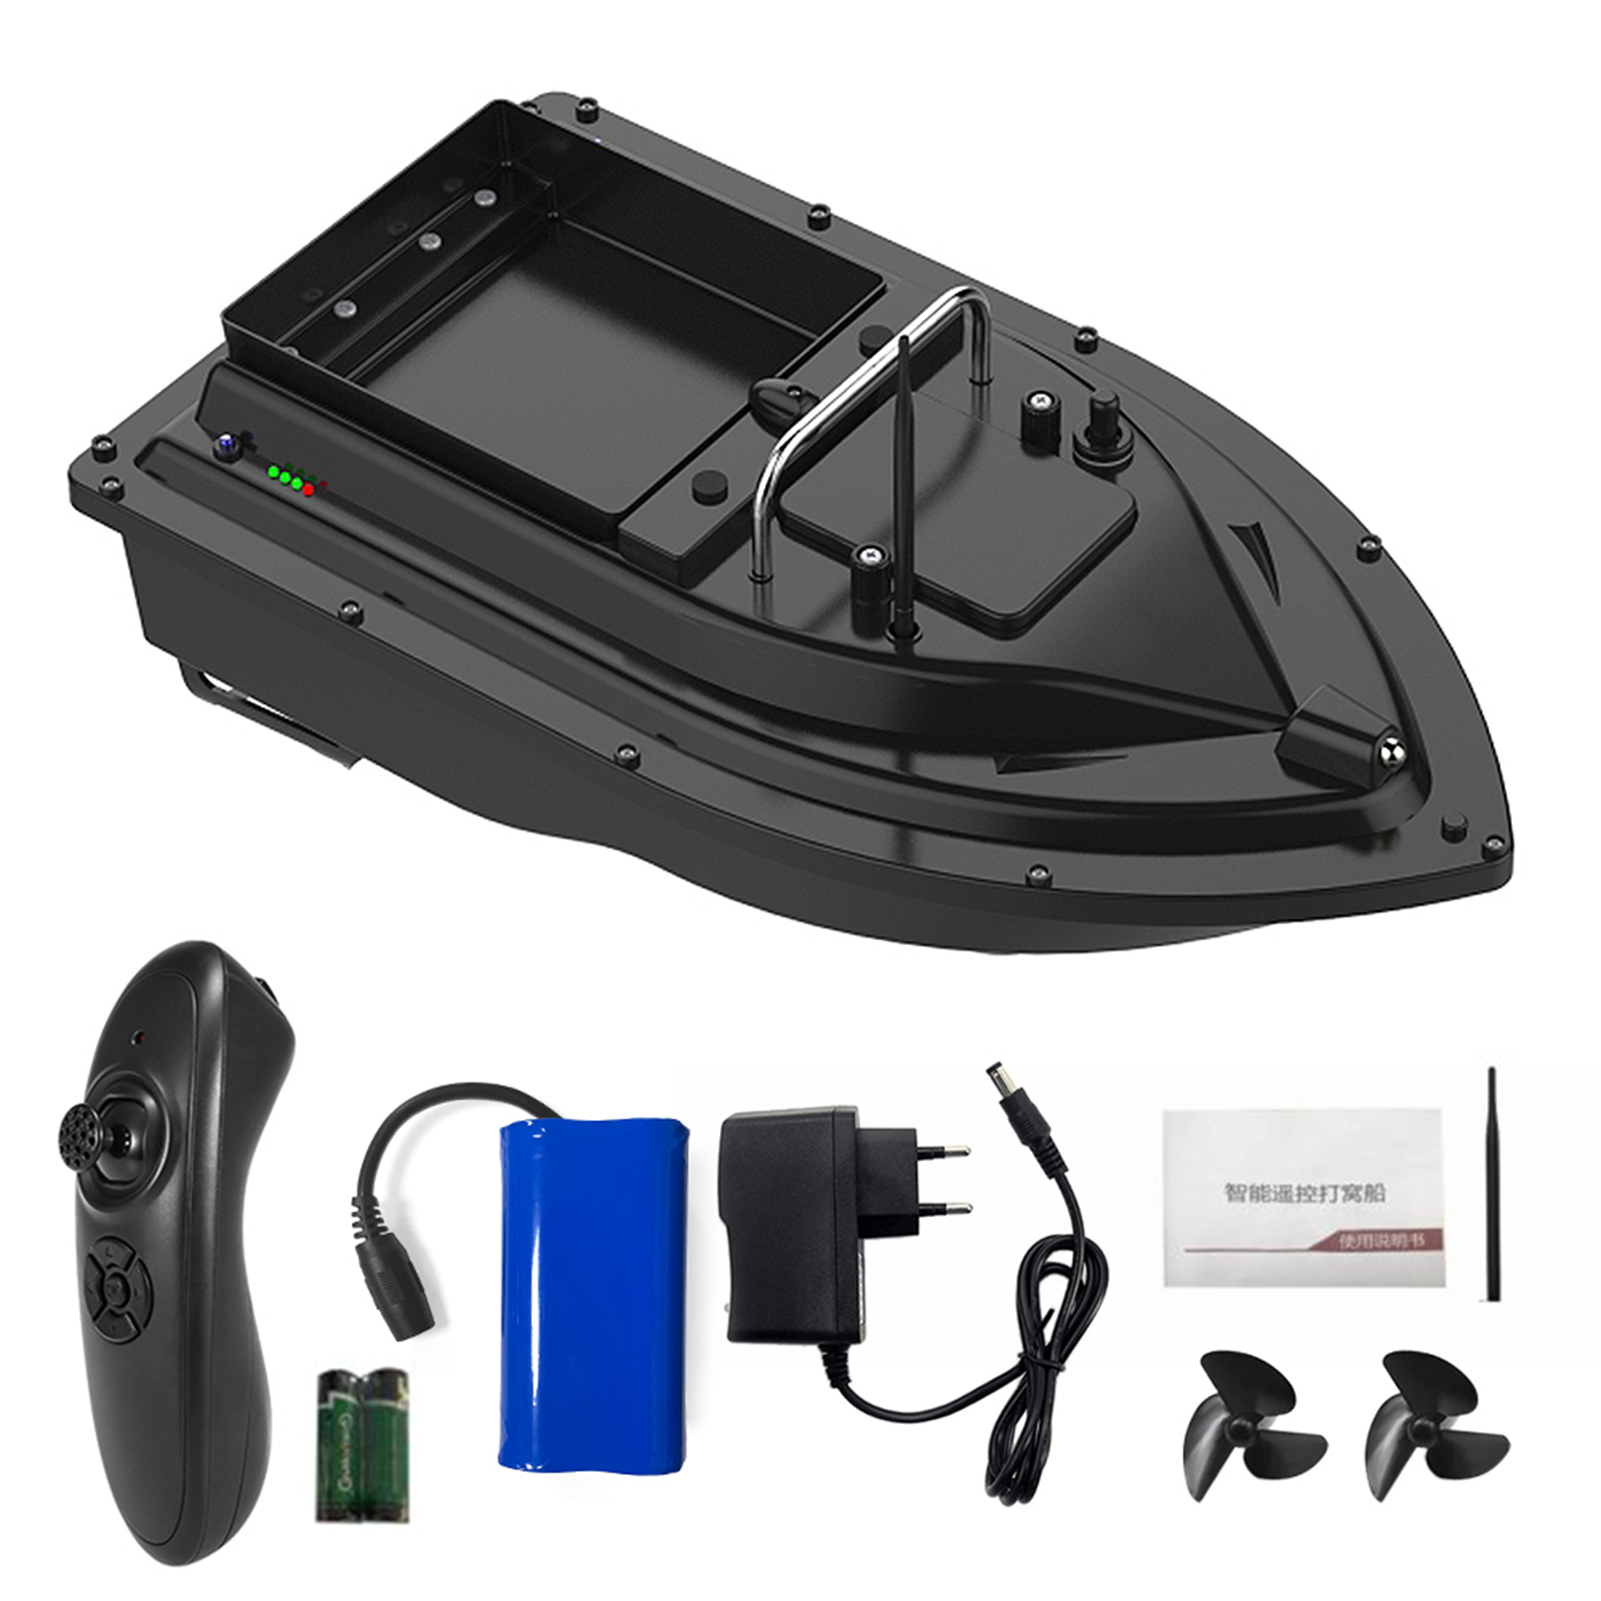 D16B GPS Function Fishing Bait Boat Smart Remote Control Fishing Boat 400-500M Remote Range LCD Display RC Bait Boat Toy EU